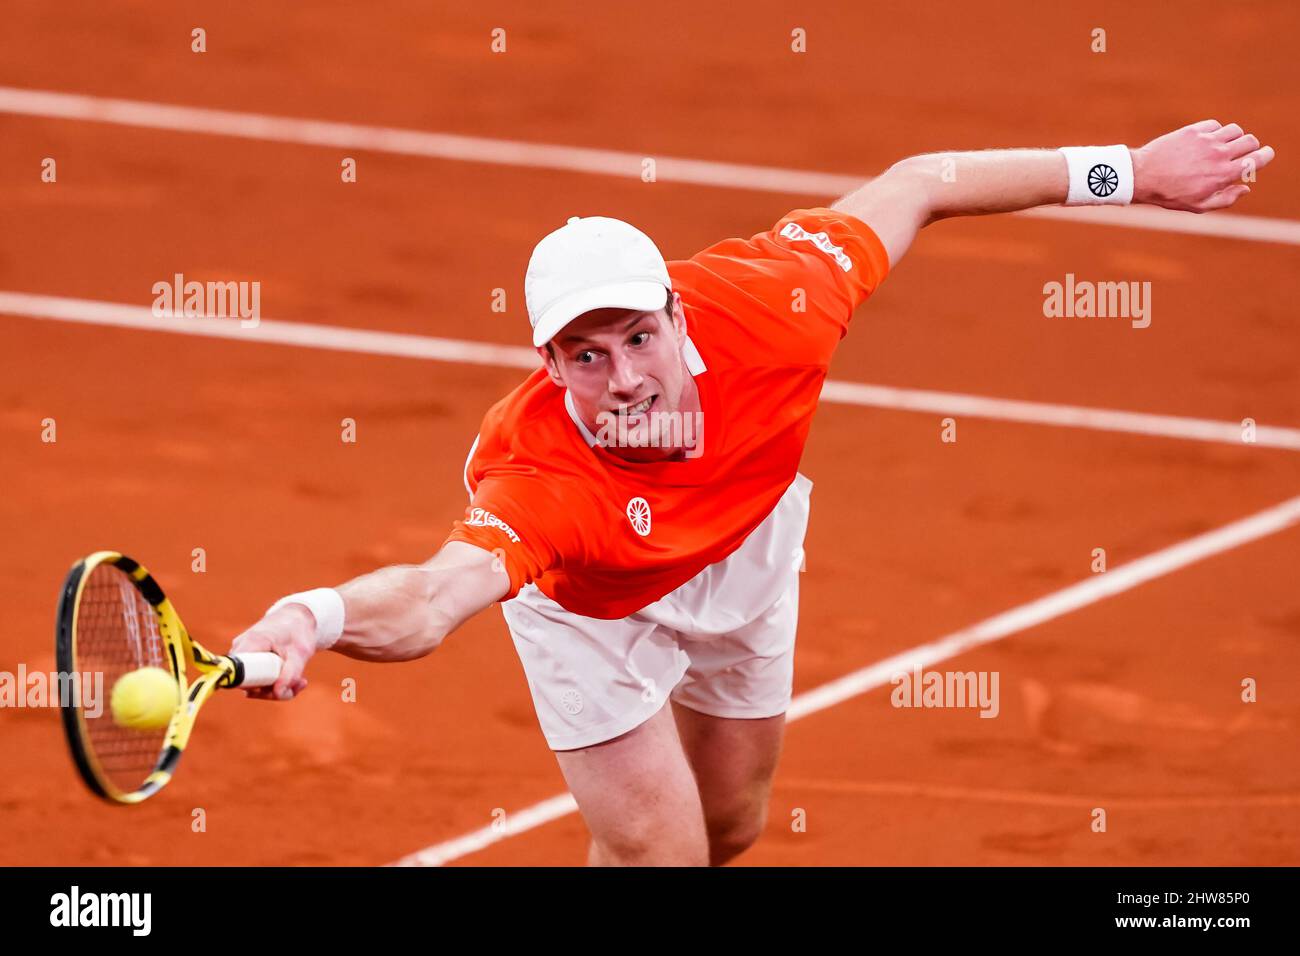 The Hague, Netherlands. 04th Mar, 2022. Den Haag, Netherlands. 04th Mar, 2022. DEN HAAG, NETHERLANDS - MARCH 4: Botic van de Zandschulp of the Netherlands plays a forehand volley in his singles match against Alexis Galarneau of Canada during the 2022 Davis Cup Qualifier between Netherlands and Canada at Sportcampus Zuiderpark on March 4, 2022 in Den Haag, Netherlands (Photo by Andre Weening/Orange Pictures) Credit: Orange Pics BV/Alamy Live News Credit: Orange Pics BV/Alamy Live News Stock Photo